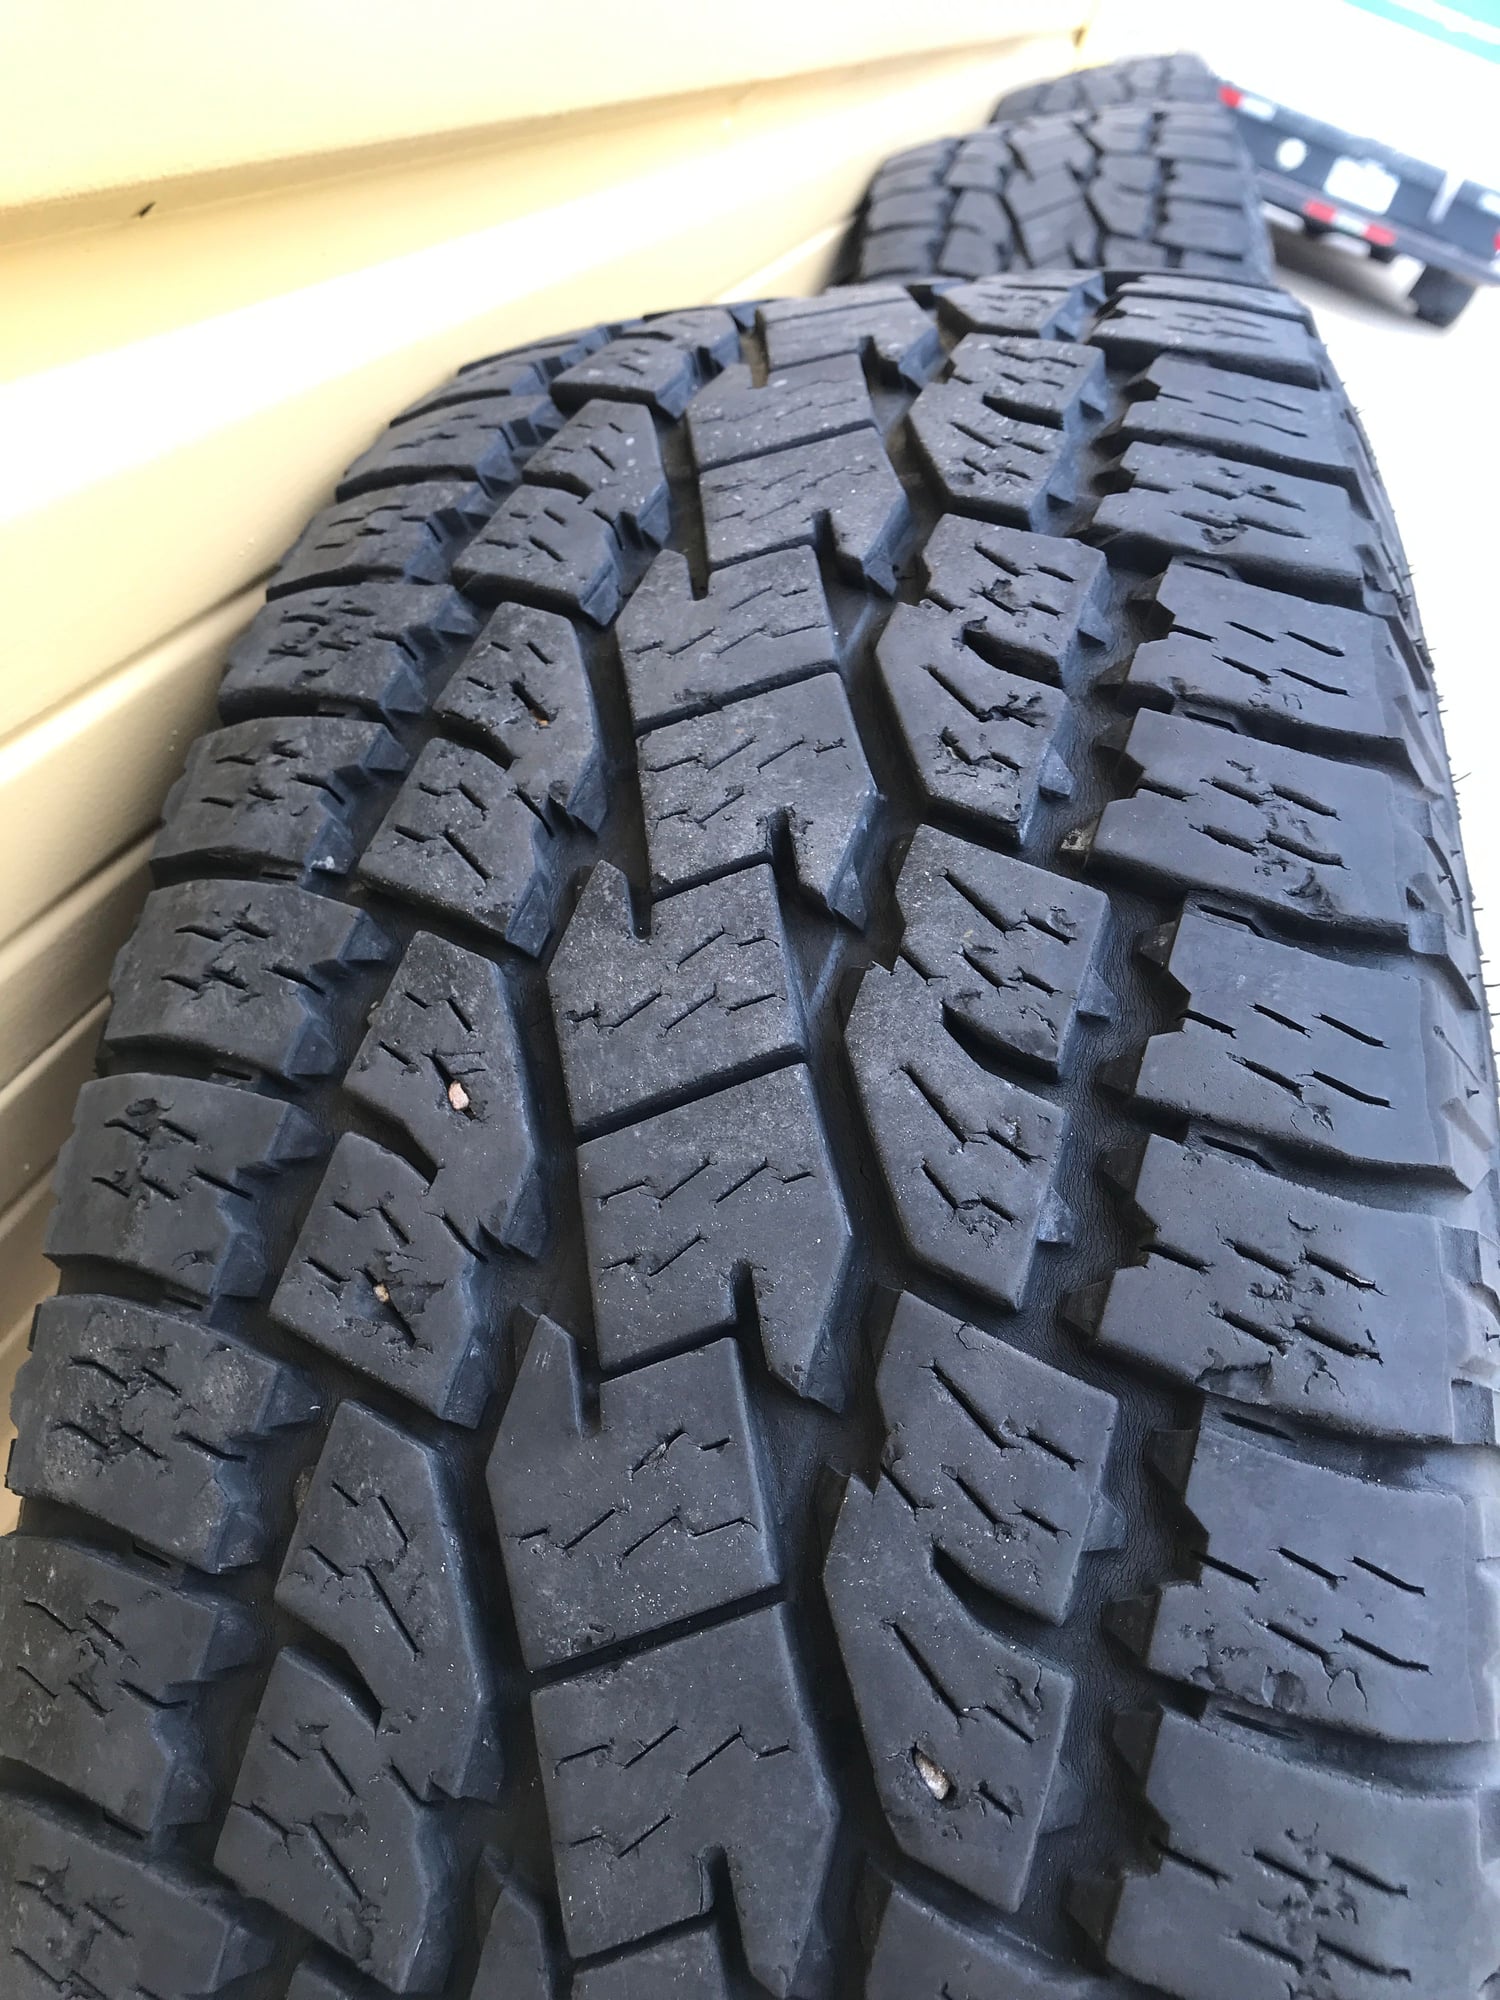 Wheels and Tires/Axles - 2017 F250 Lariat 20s - Used - 2017 to 2020 Ford F-250 Super Duty - Dallas, TX 75206, United States